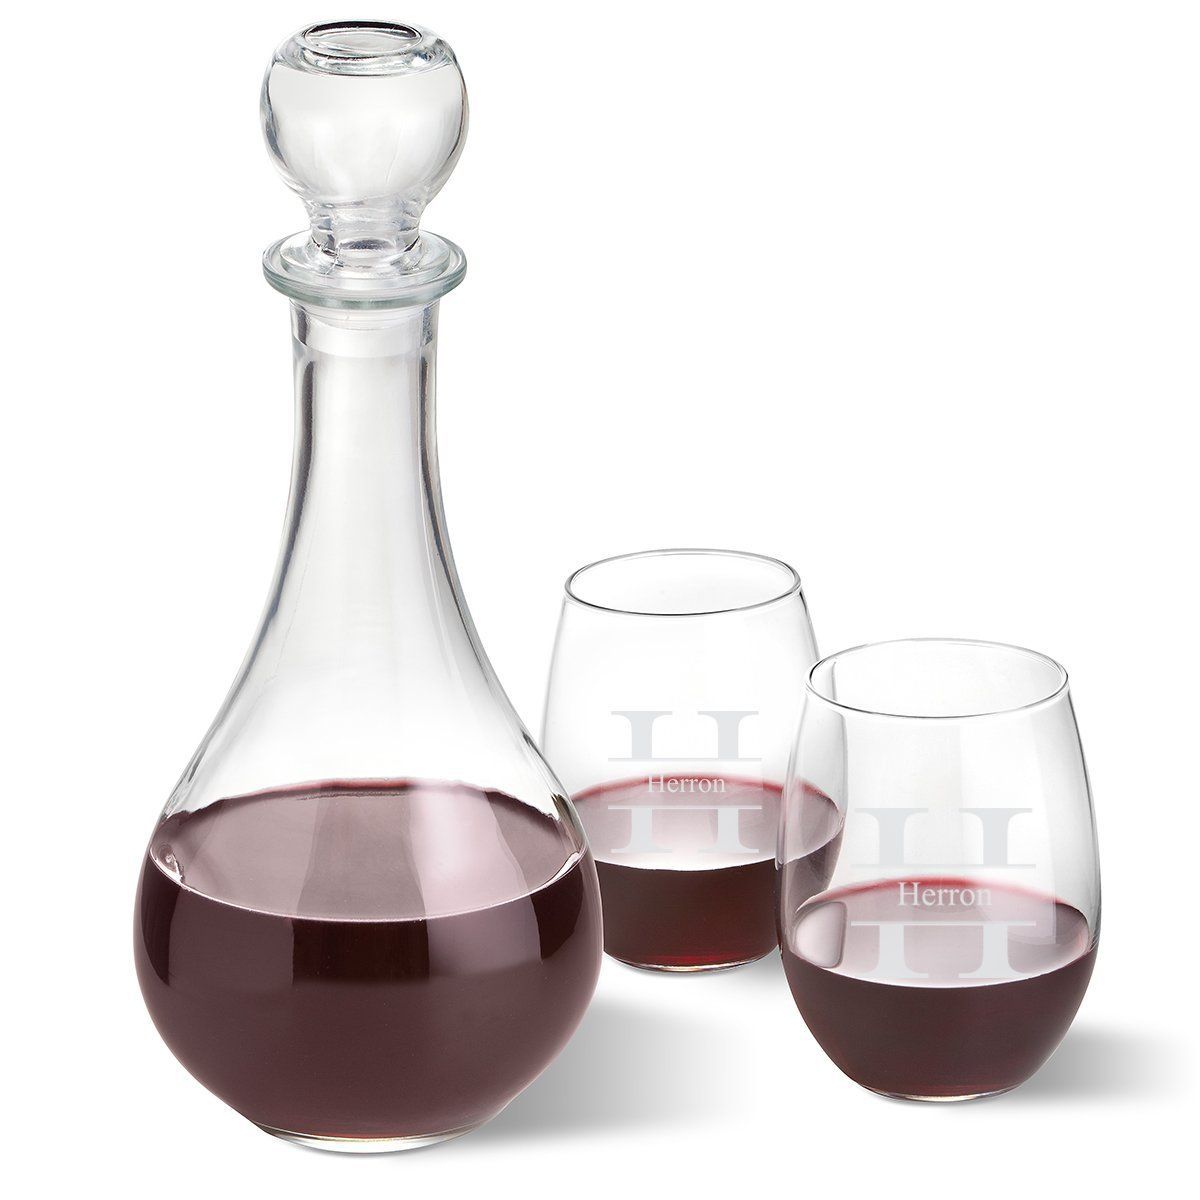 Bormioli Rocco Loto Wine Decanter with stopper and 2 Stemless Wine Glass Set